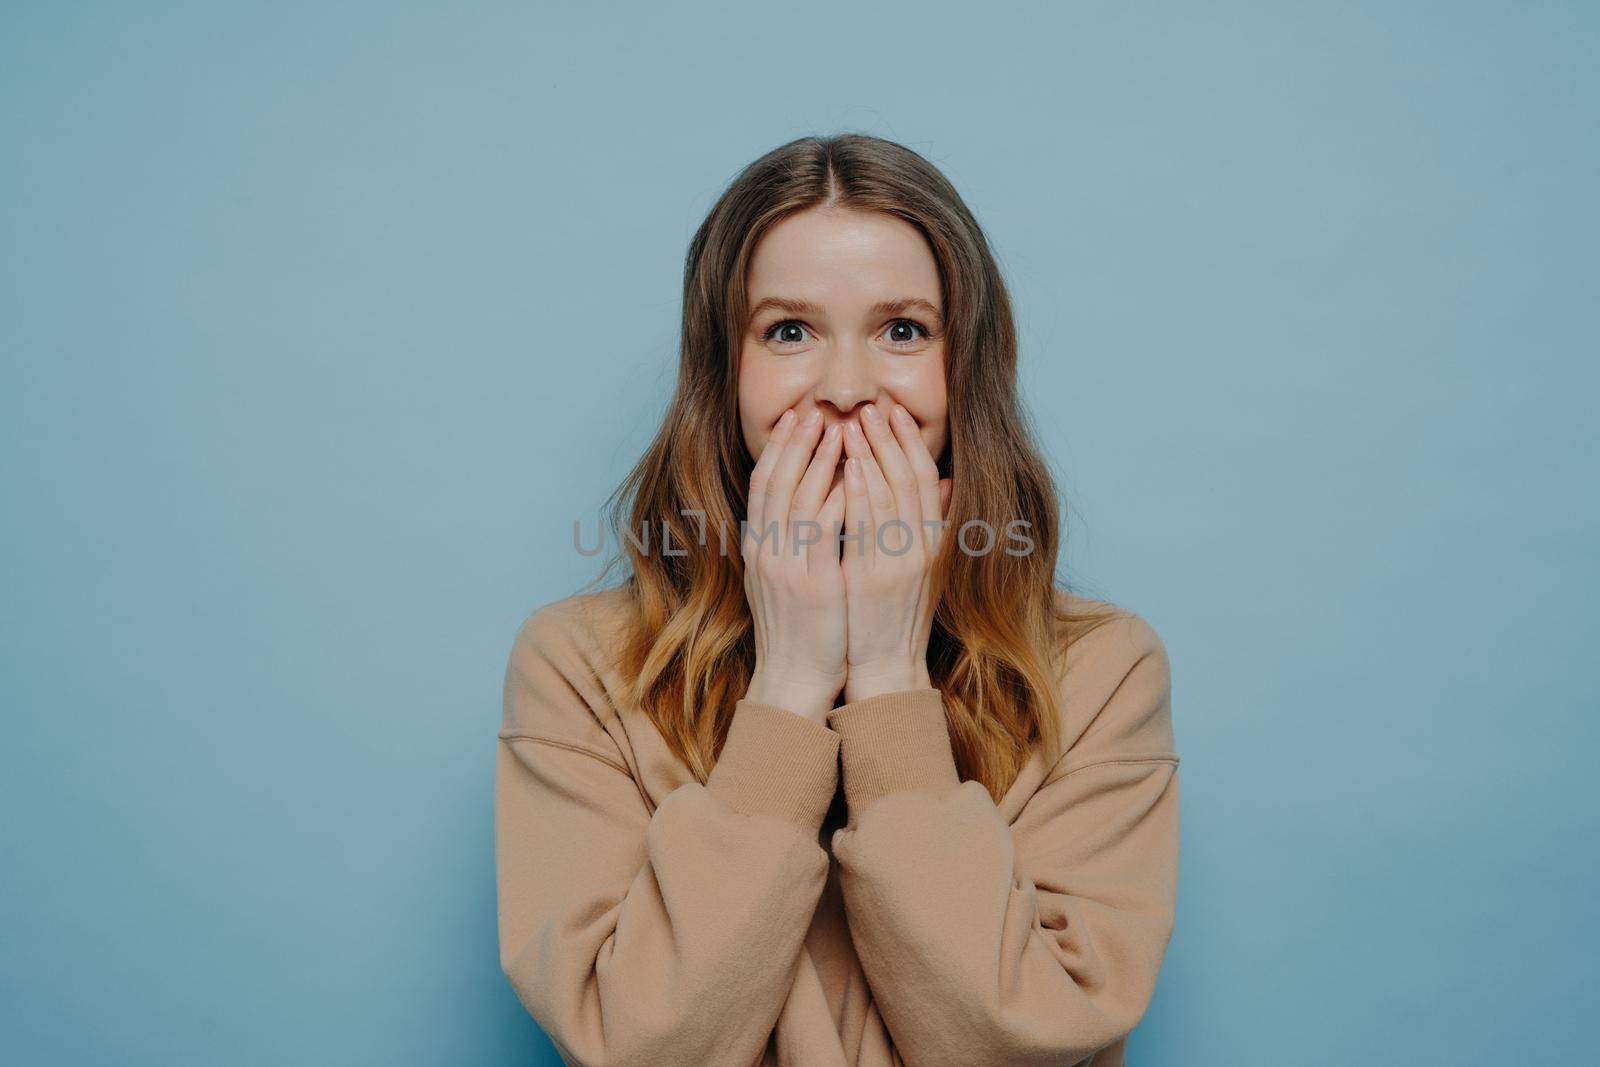 Young surprised teen girl in casual wear on blue background by vkstock